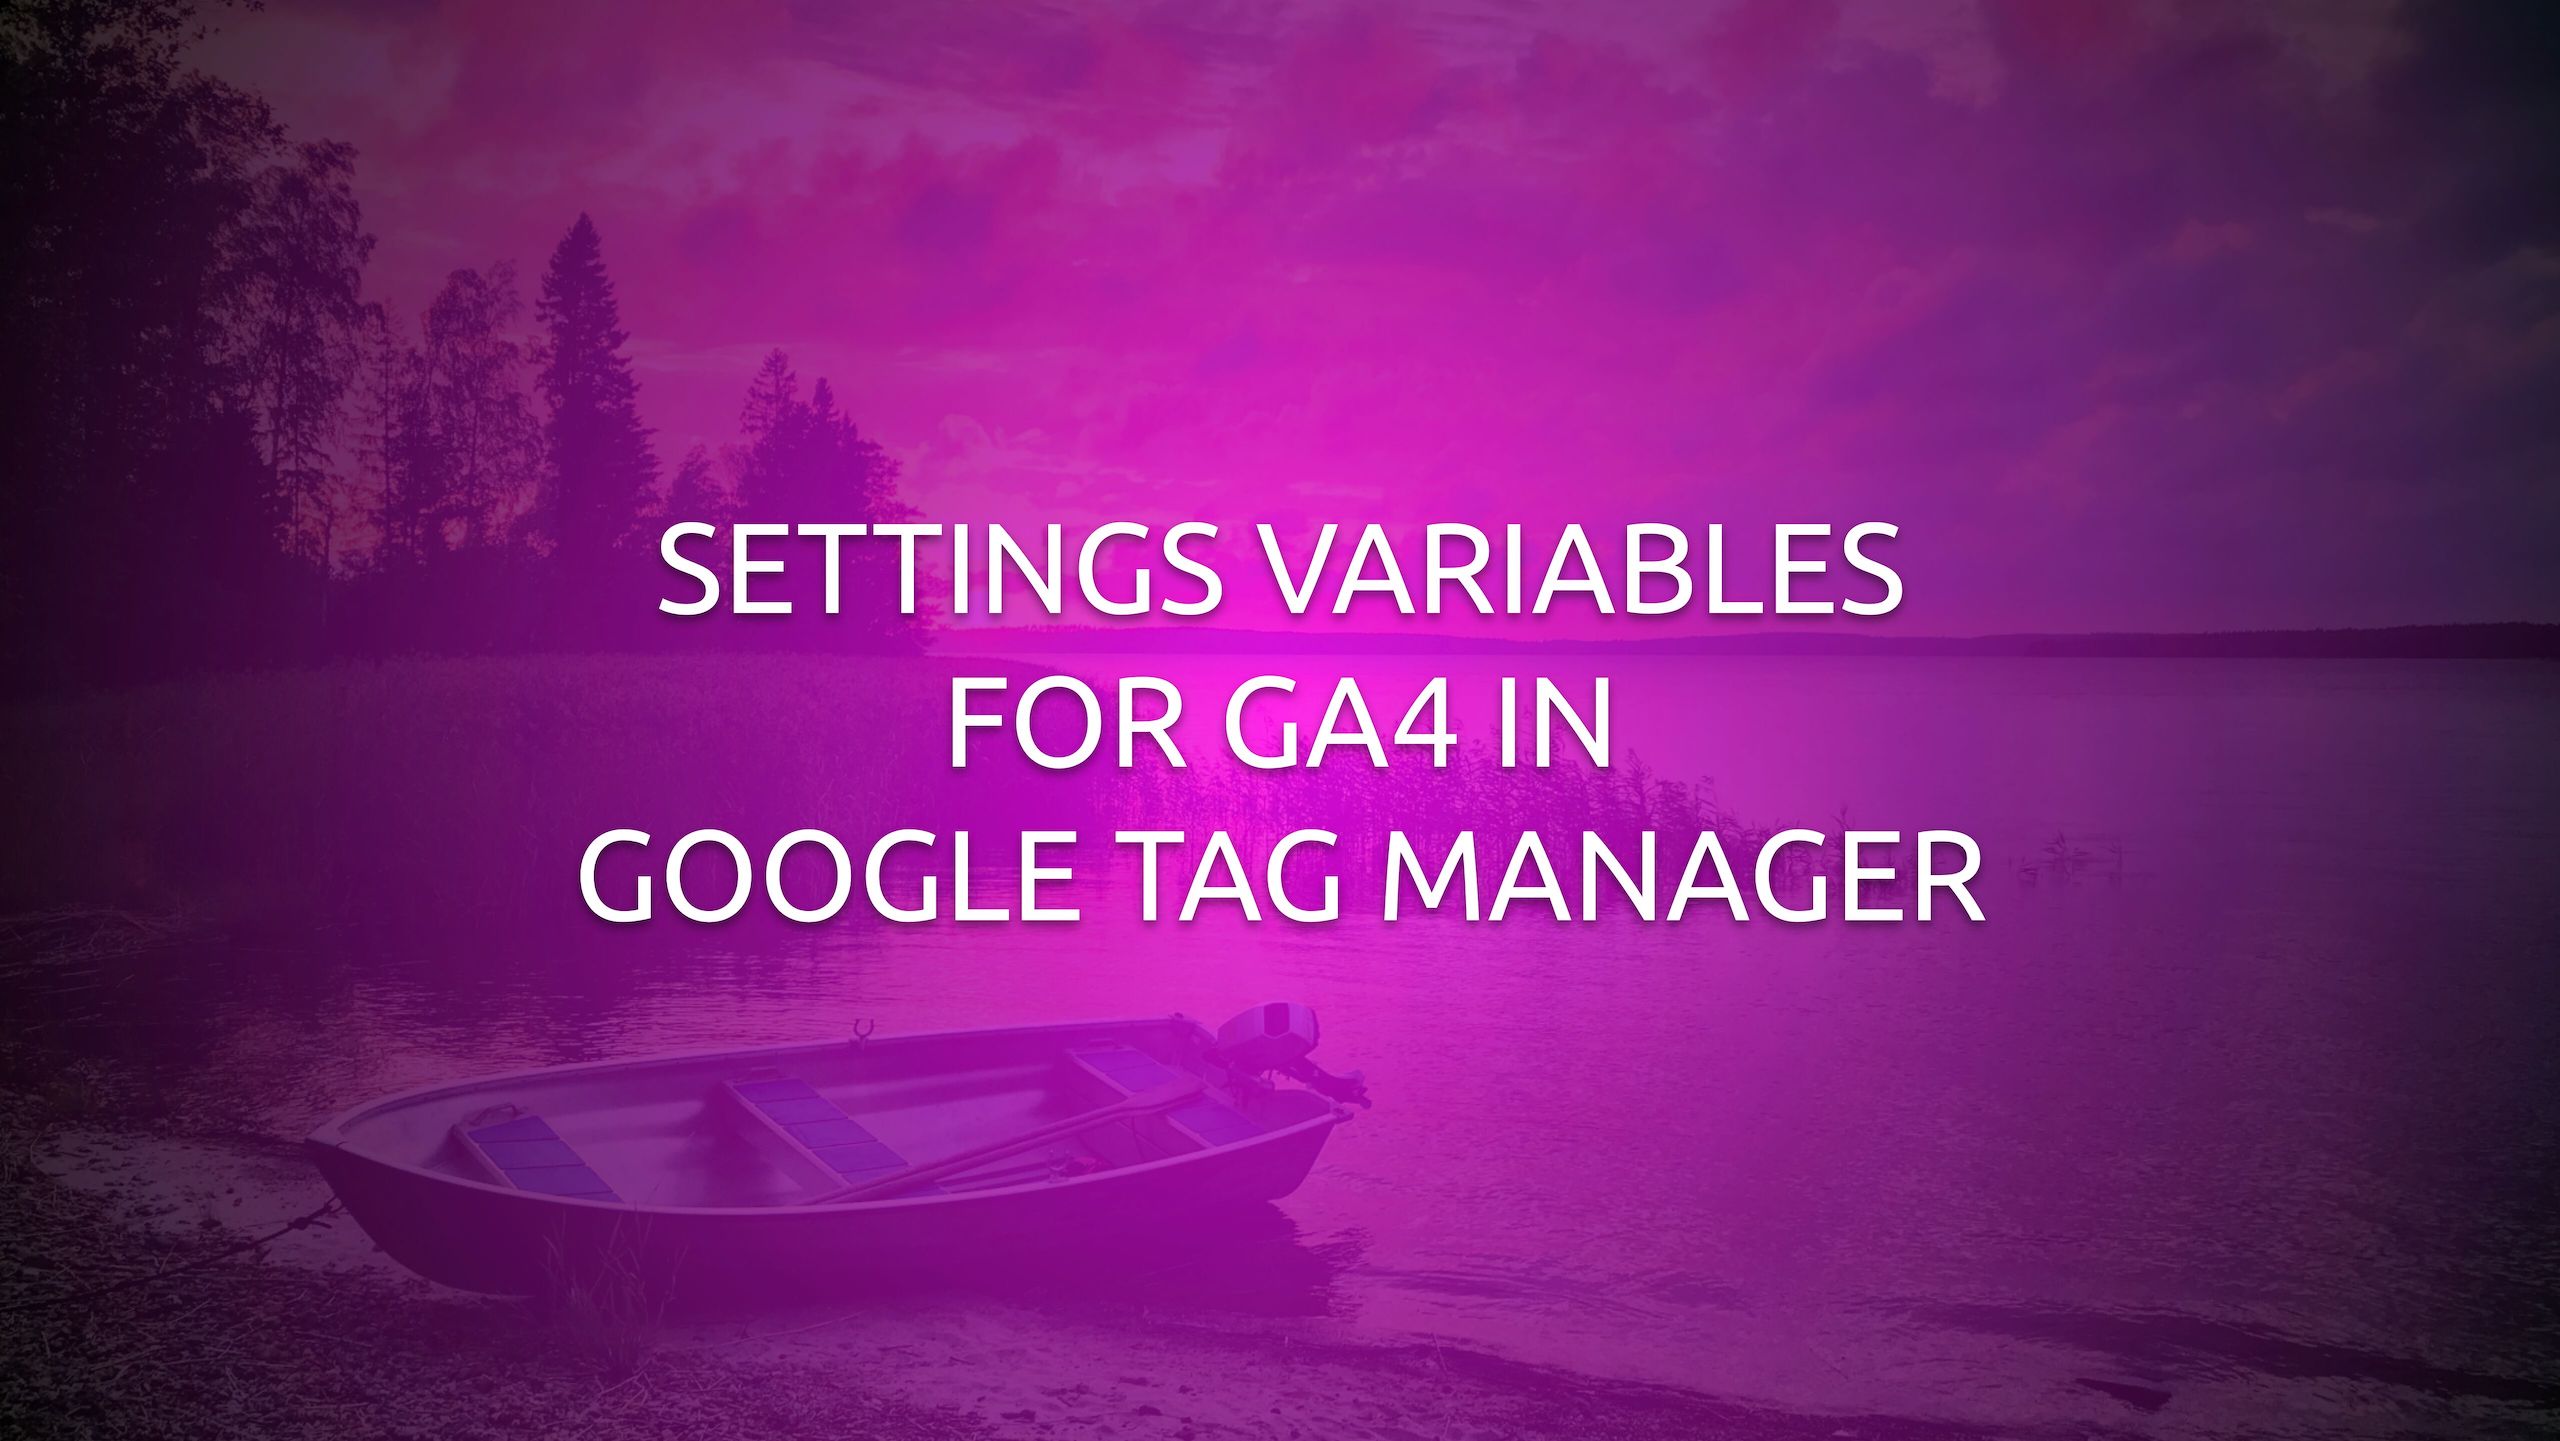 Settings Variables For GA4 In Google Tag Manager